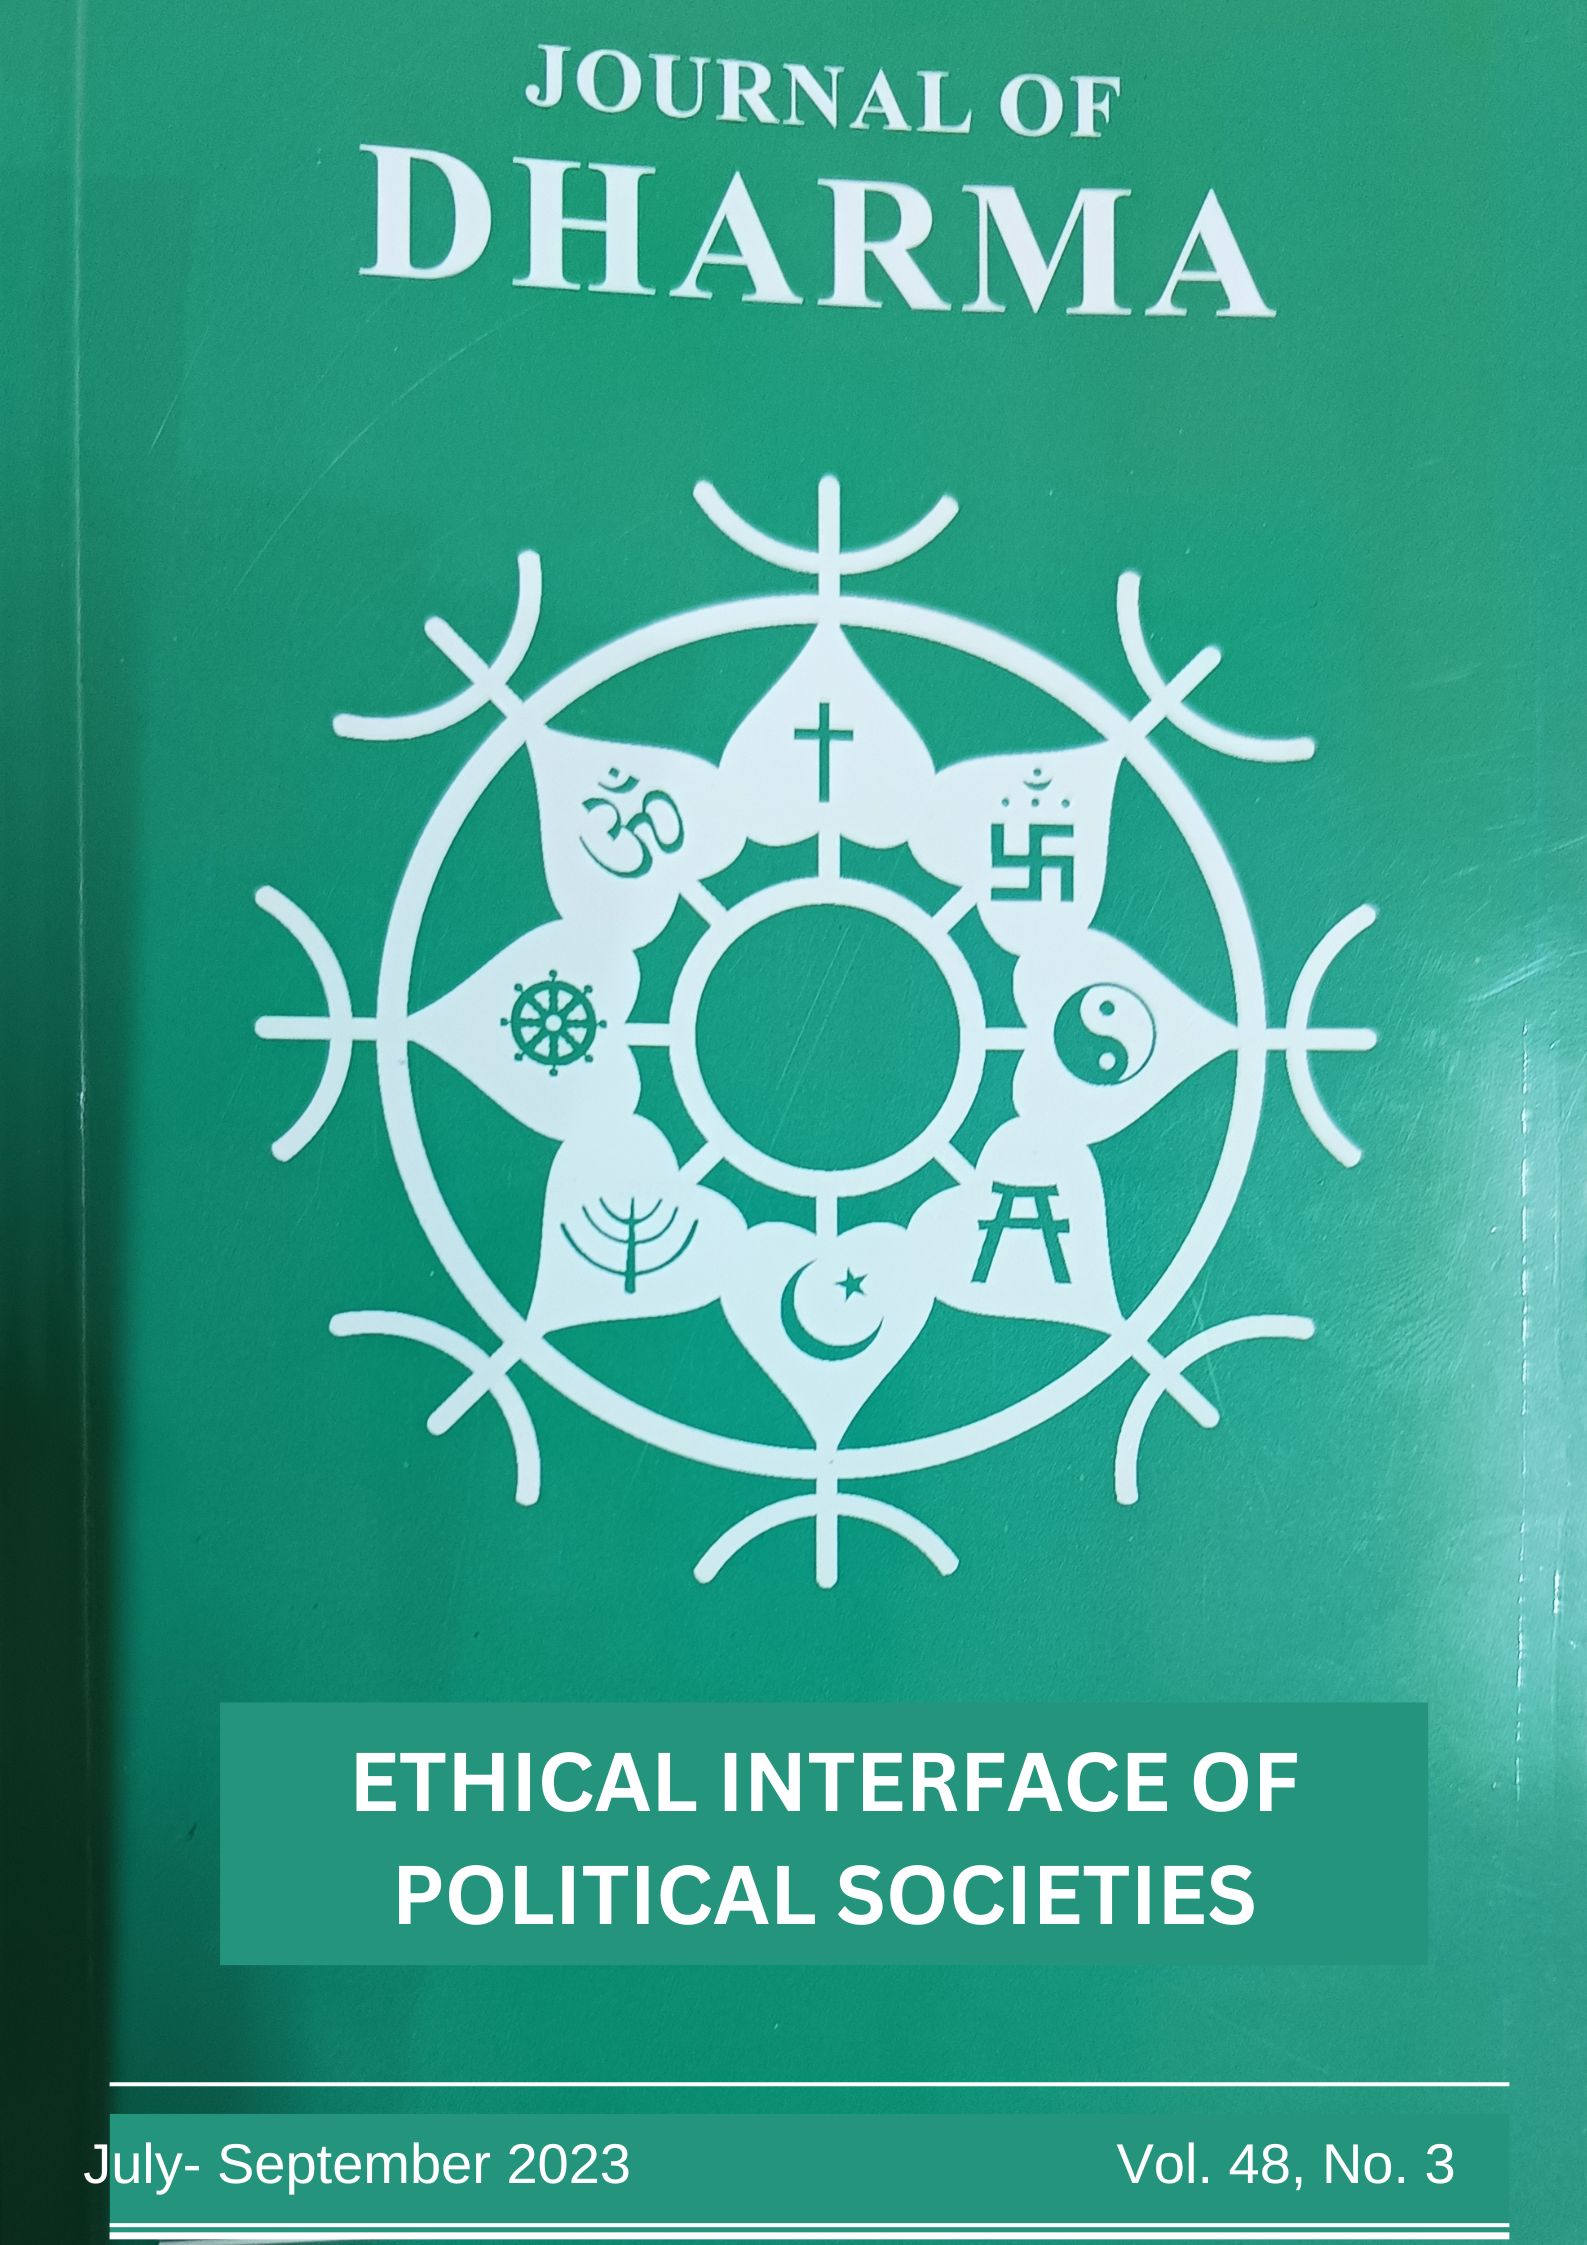 					View Vol. 48 No. 03 (2023): ETHICAL INTERFACE OF POLITICAL SOCIETIES
				